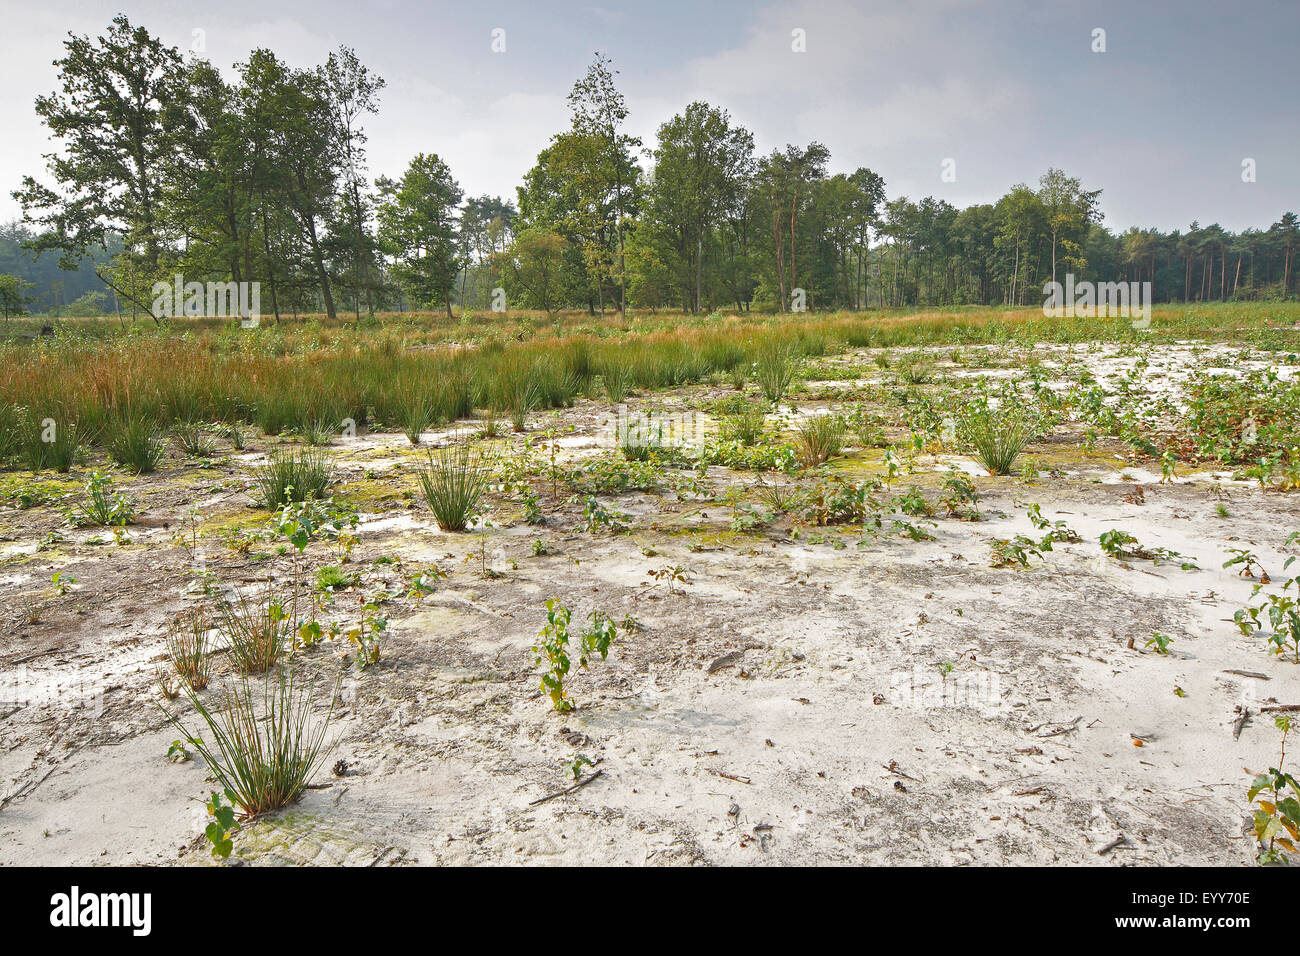 Nature management, removing top soil in Stropersbos, Belgium Stock Photo